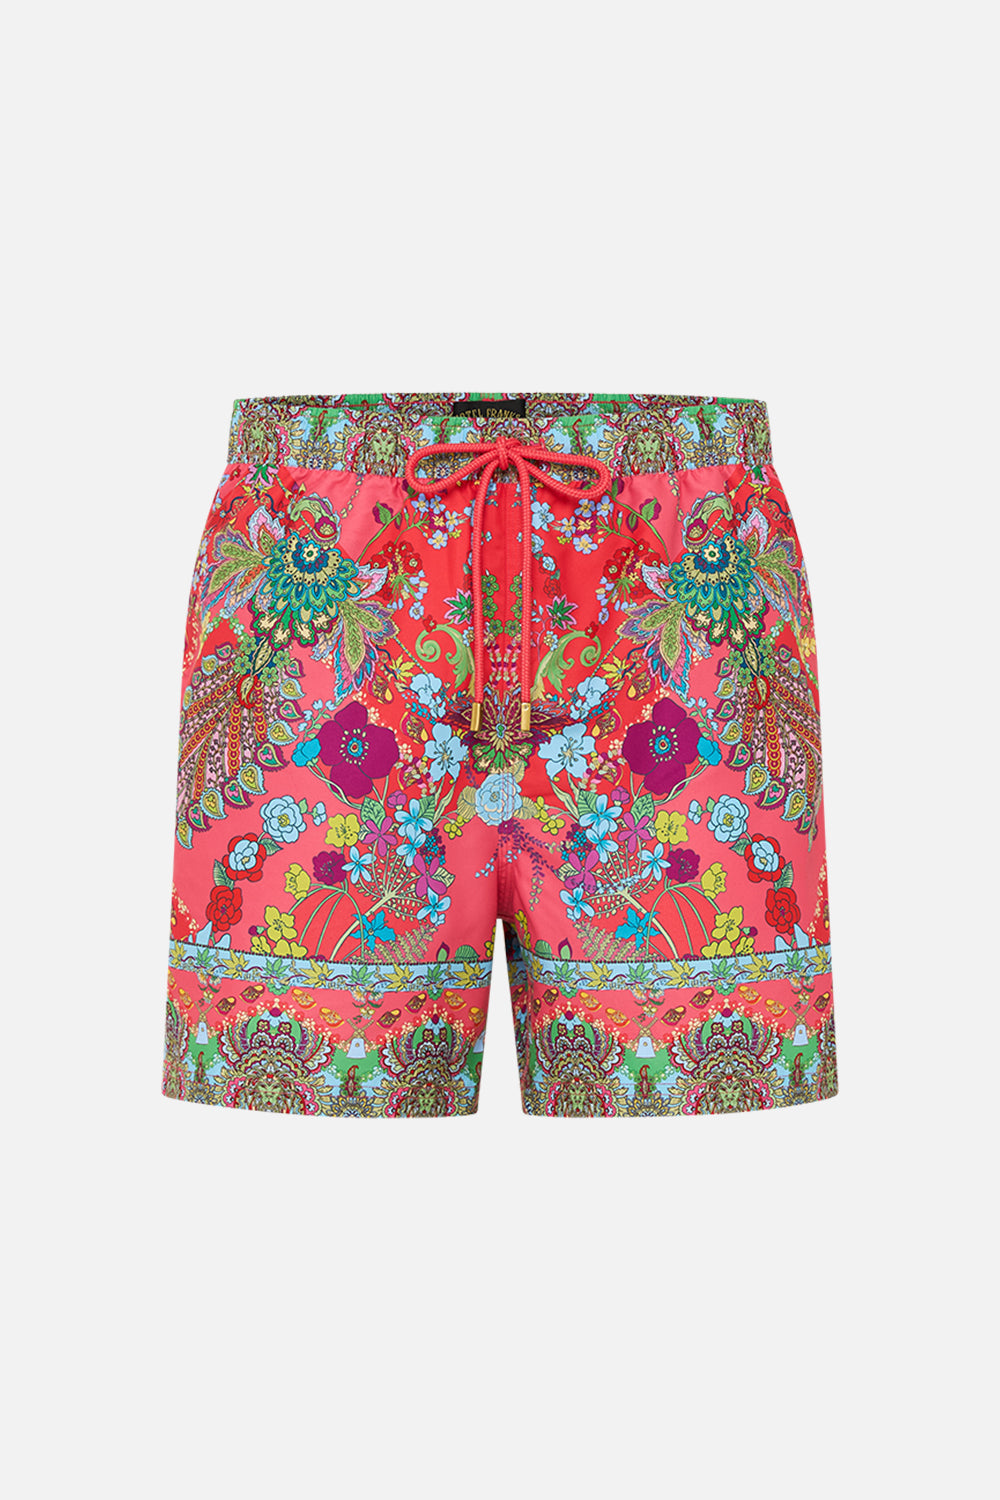 Hotel Franks by CAMILLA pink mid length boardshort in Windmills and Wildflowers